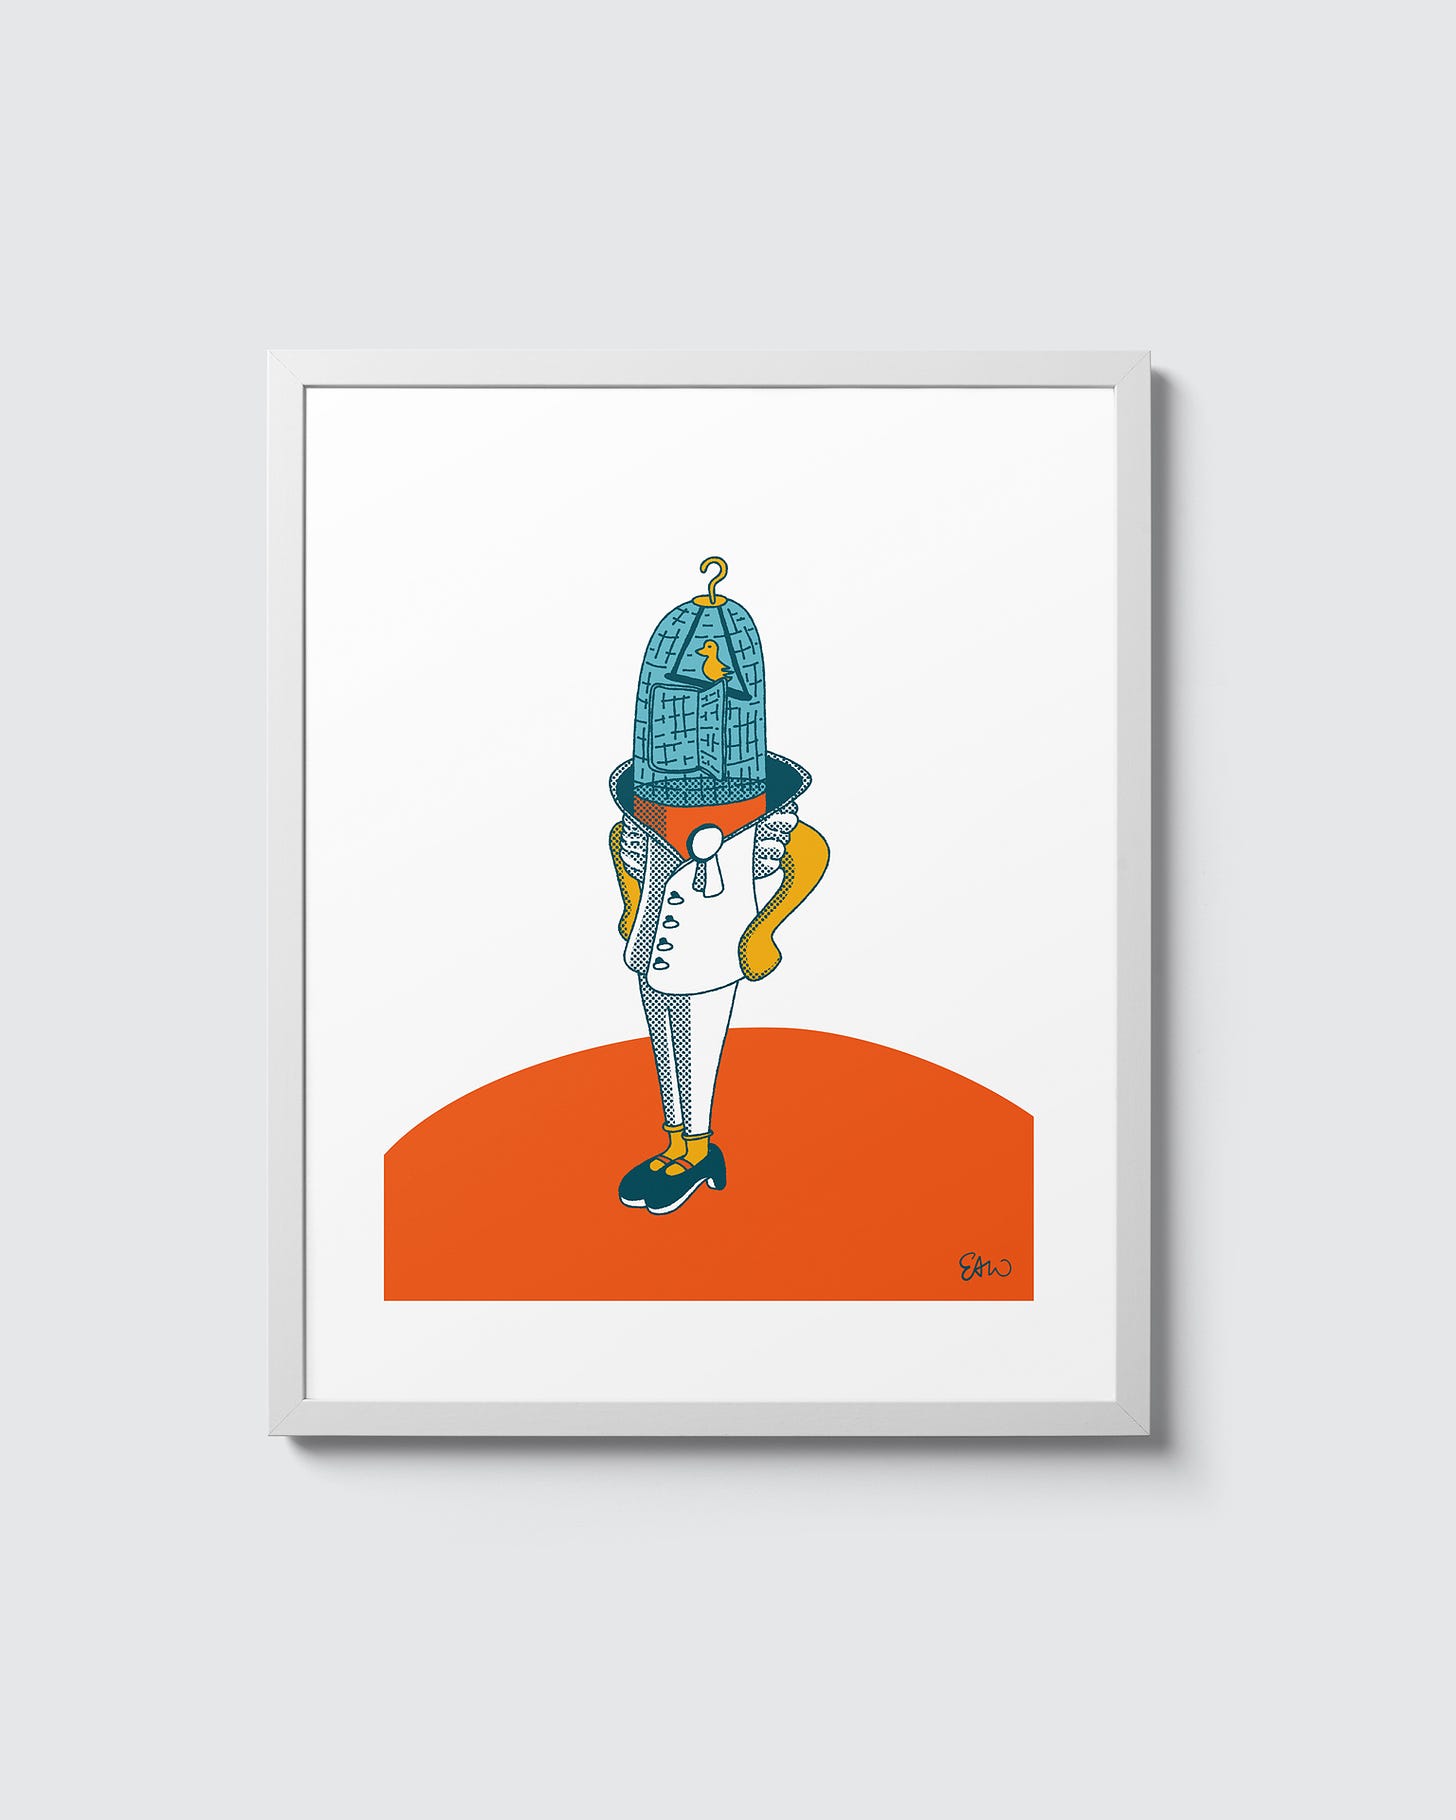 Vector illustration of a human figure with a bird cage instead of a head. The character’s pose is upright and confident, with hands on the hips. The drawing respects a limited palette of orange, teal, yellow and blue colours with halftones for shading.